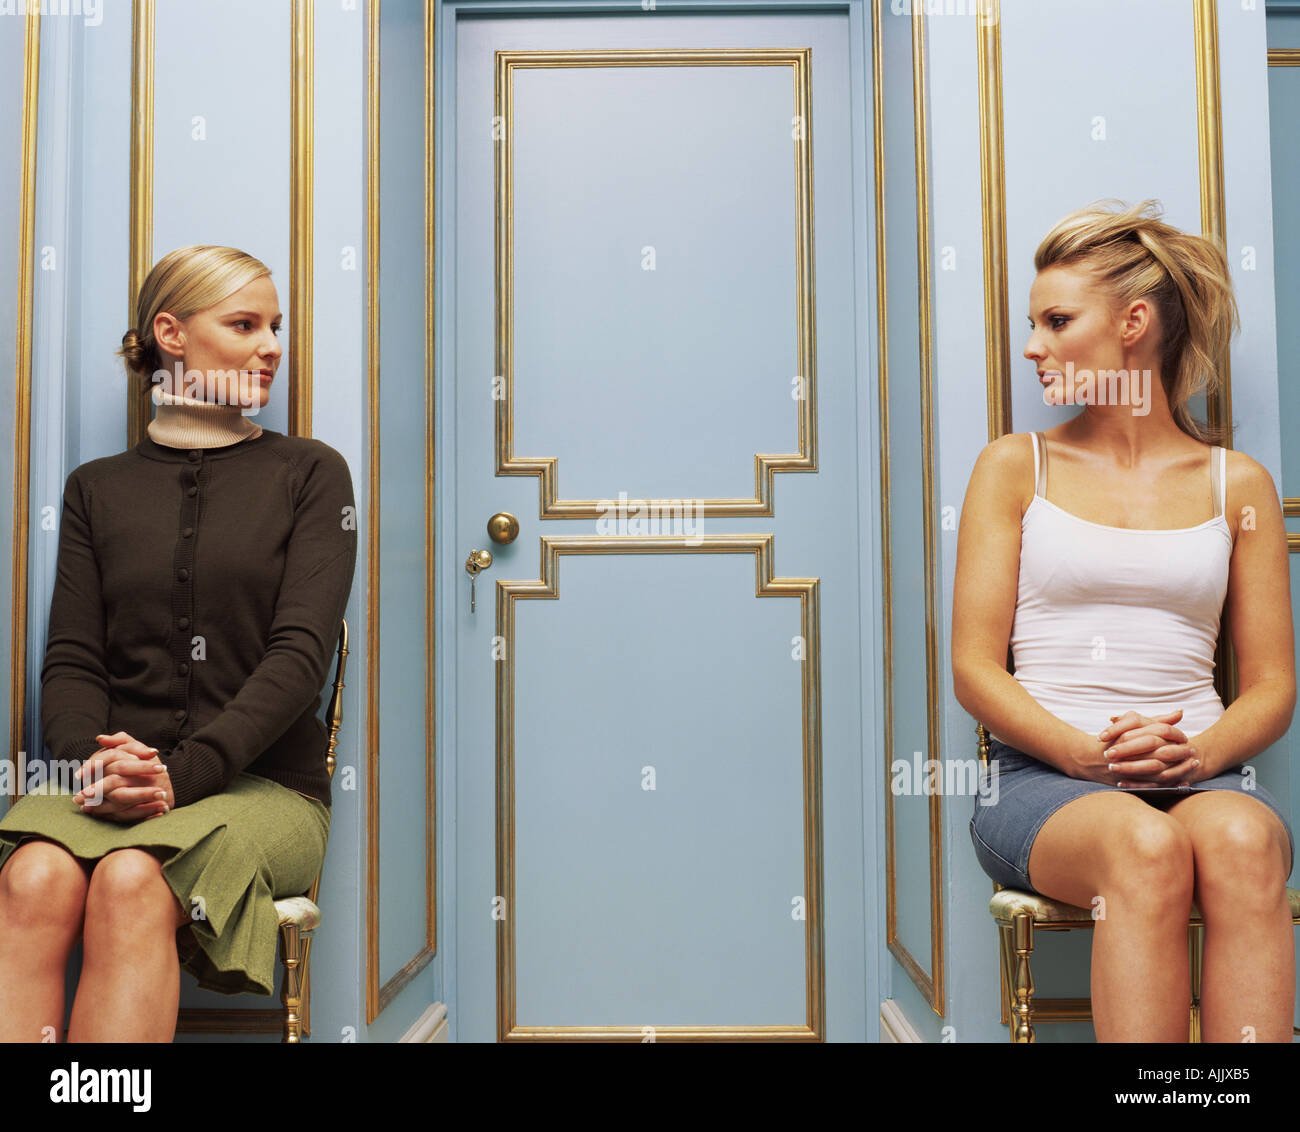 Two women on opposite sides of a doorway Stock Photo